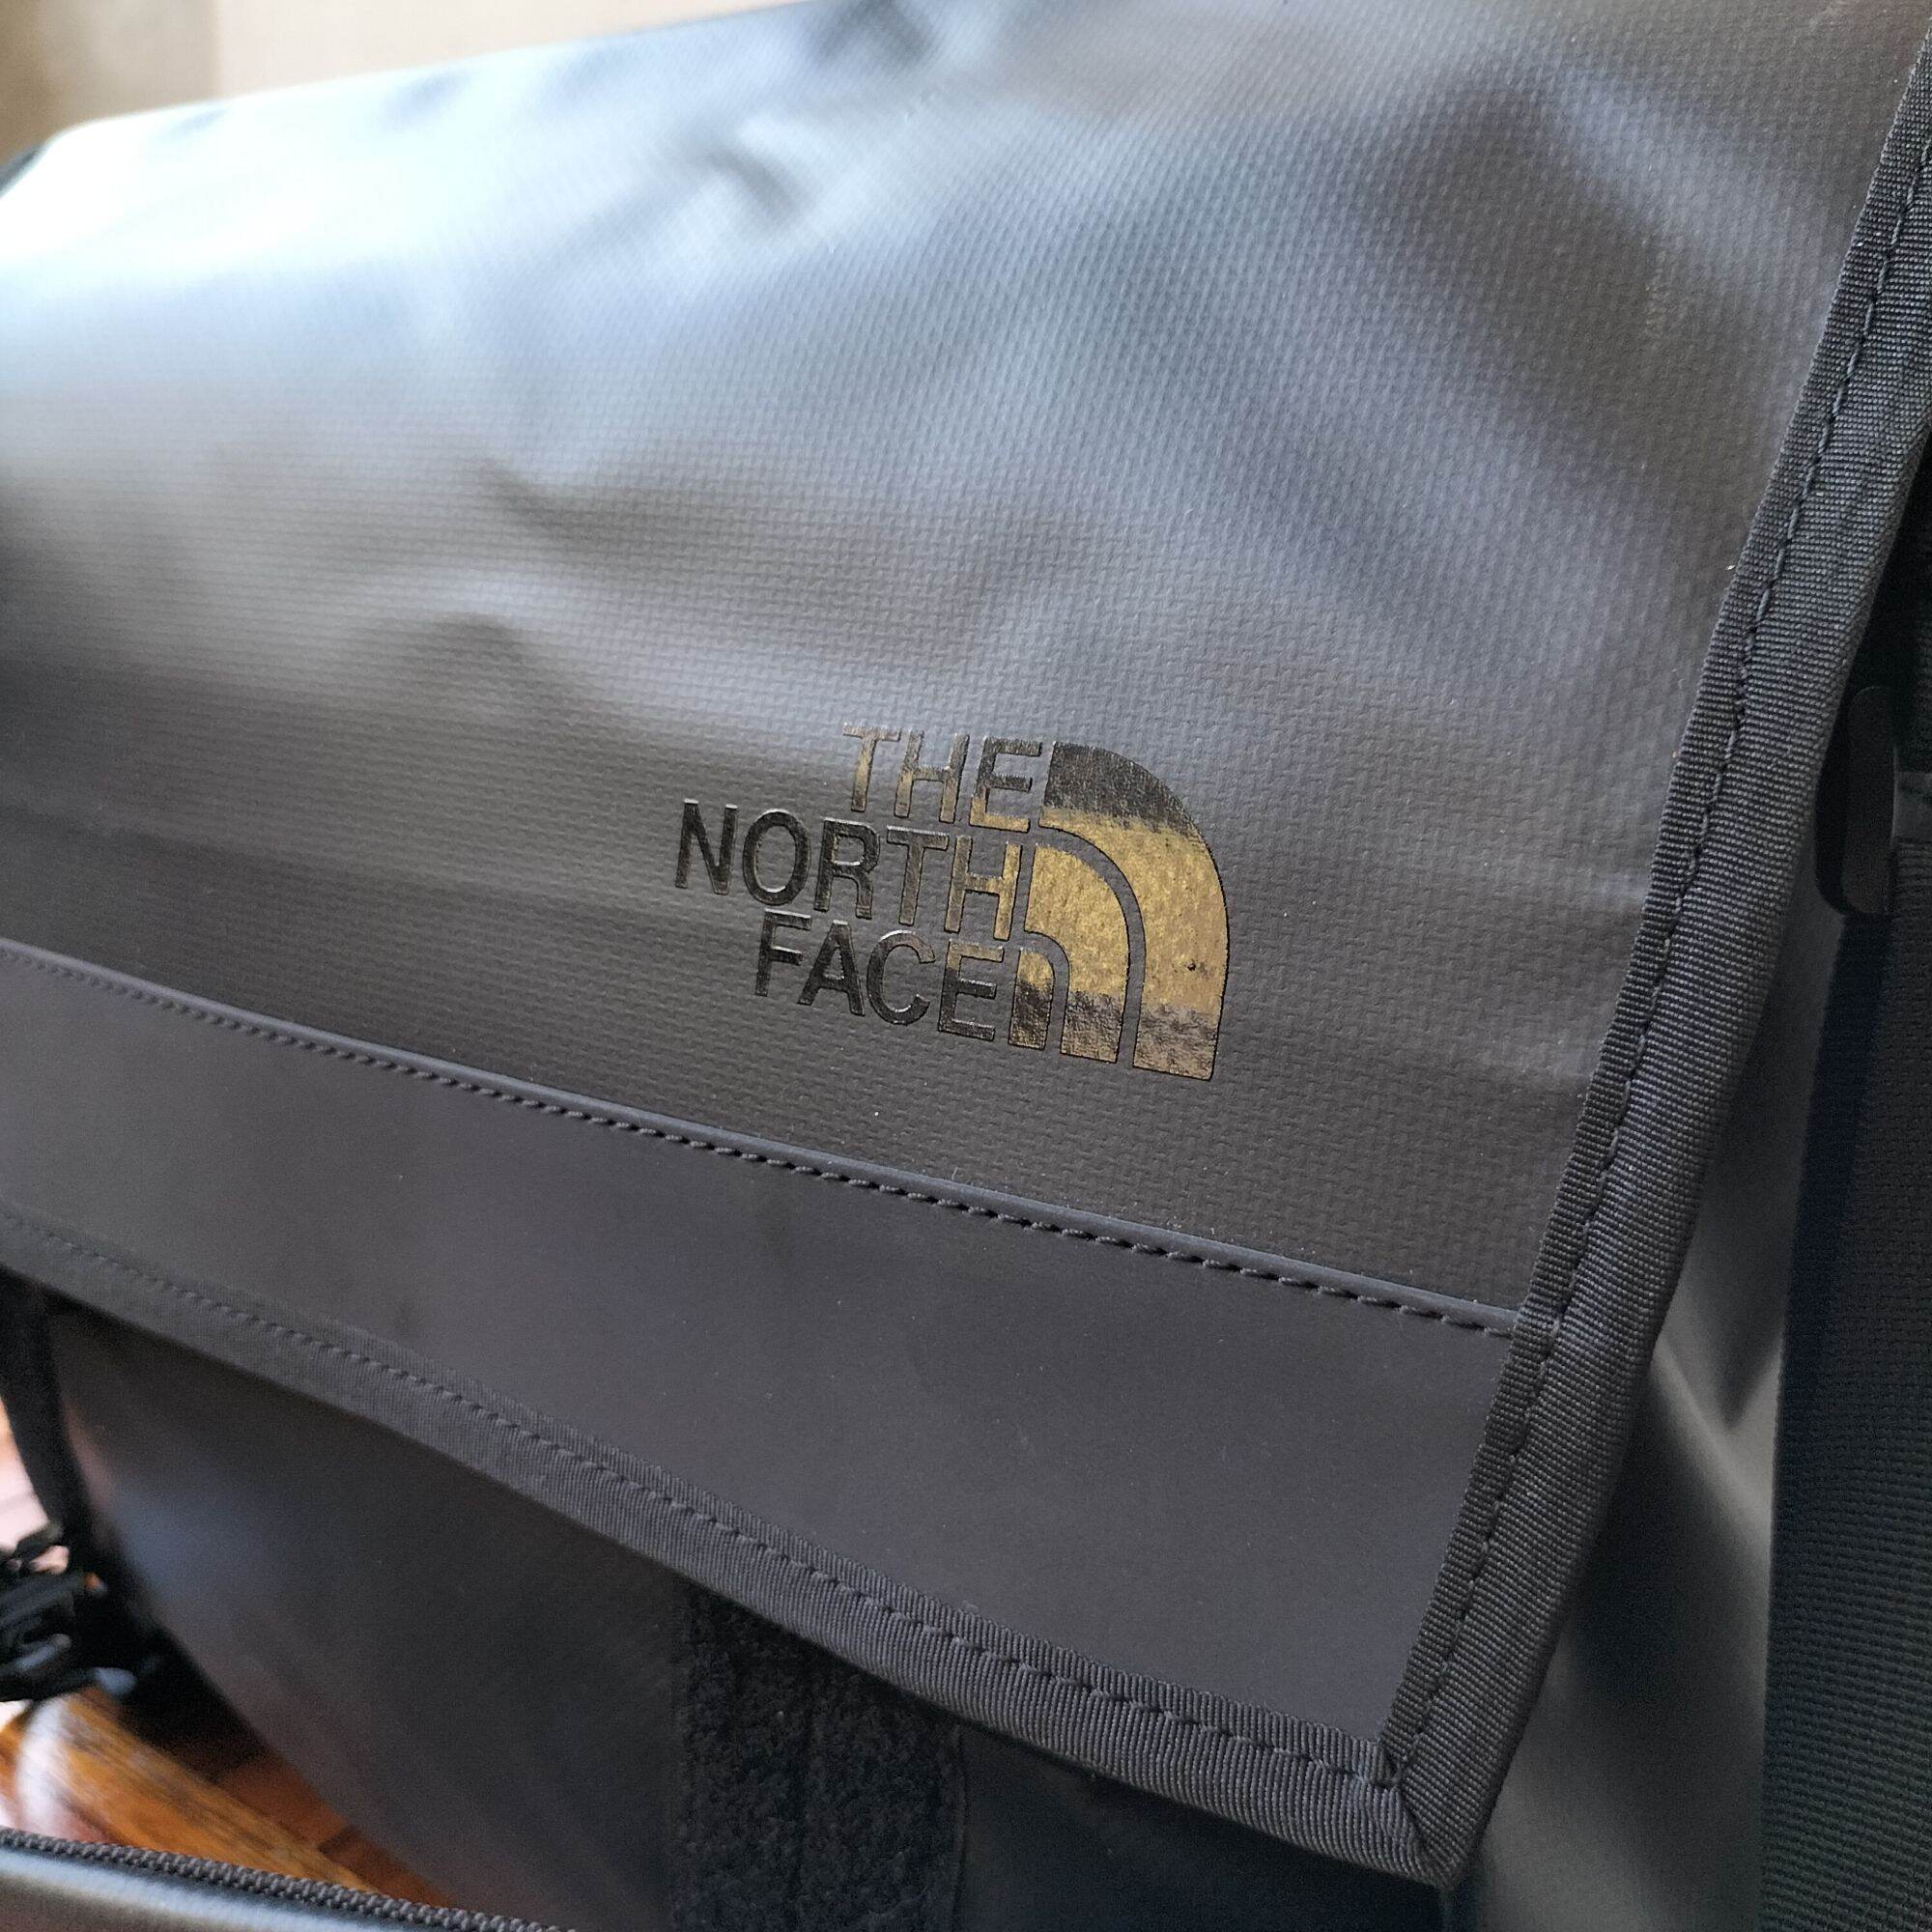 THE NORTH FACE MESSENGER BAG | Lazada Indonesia